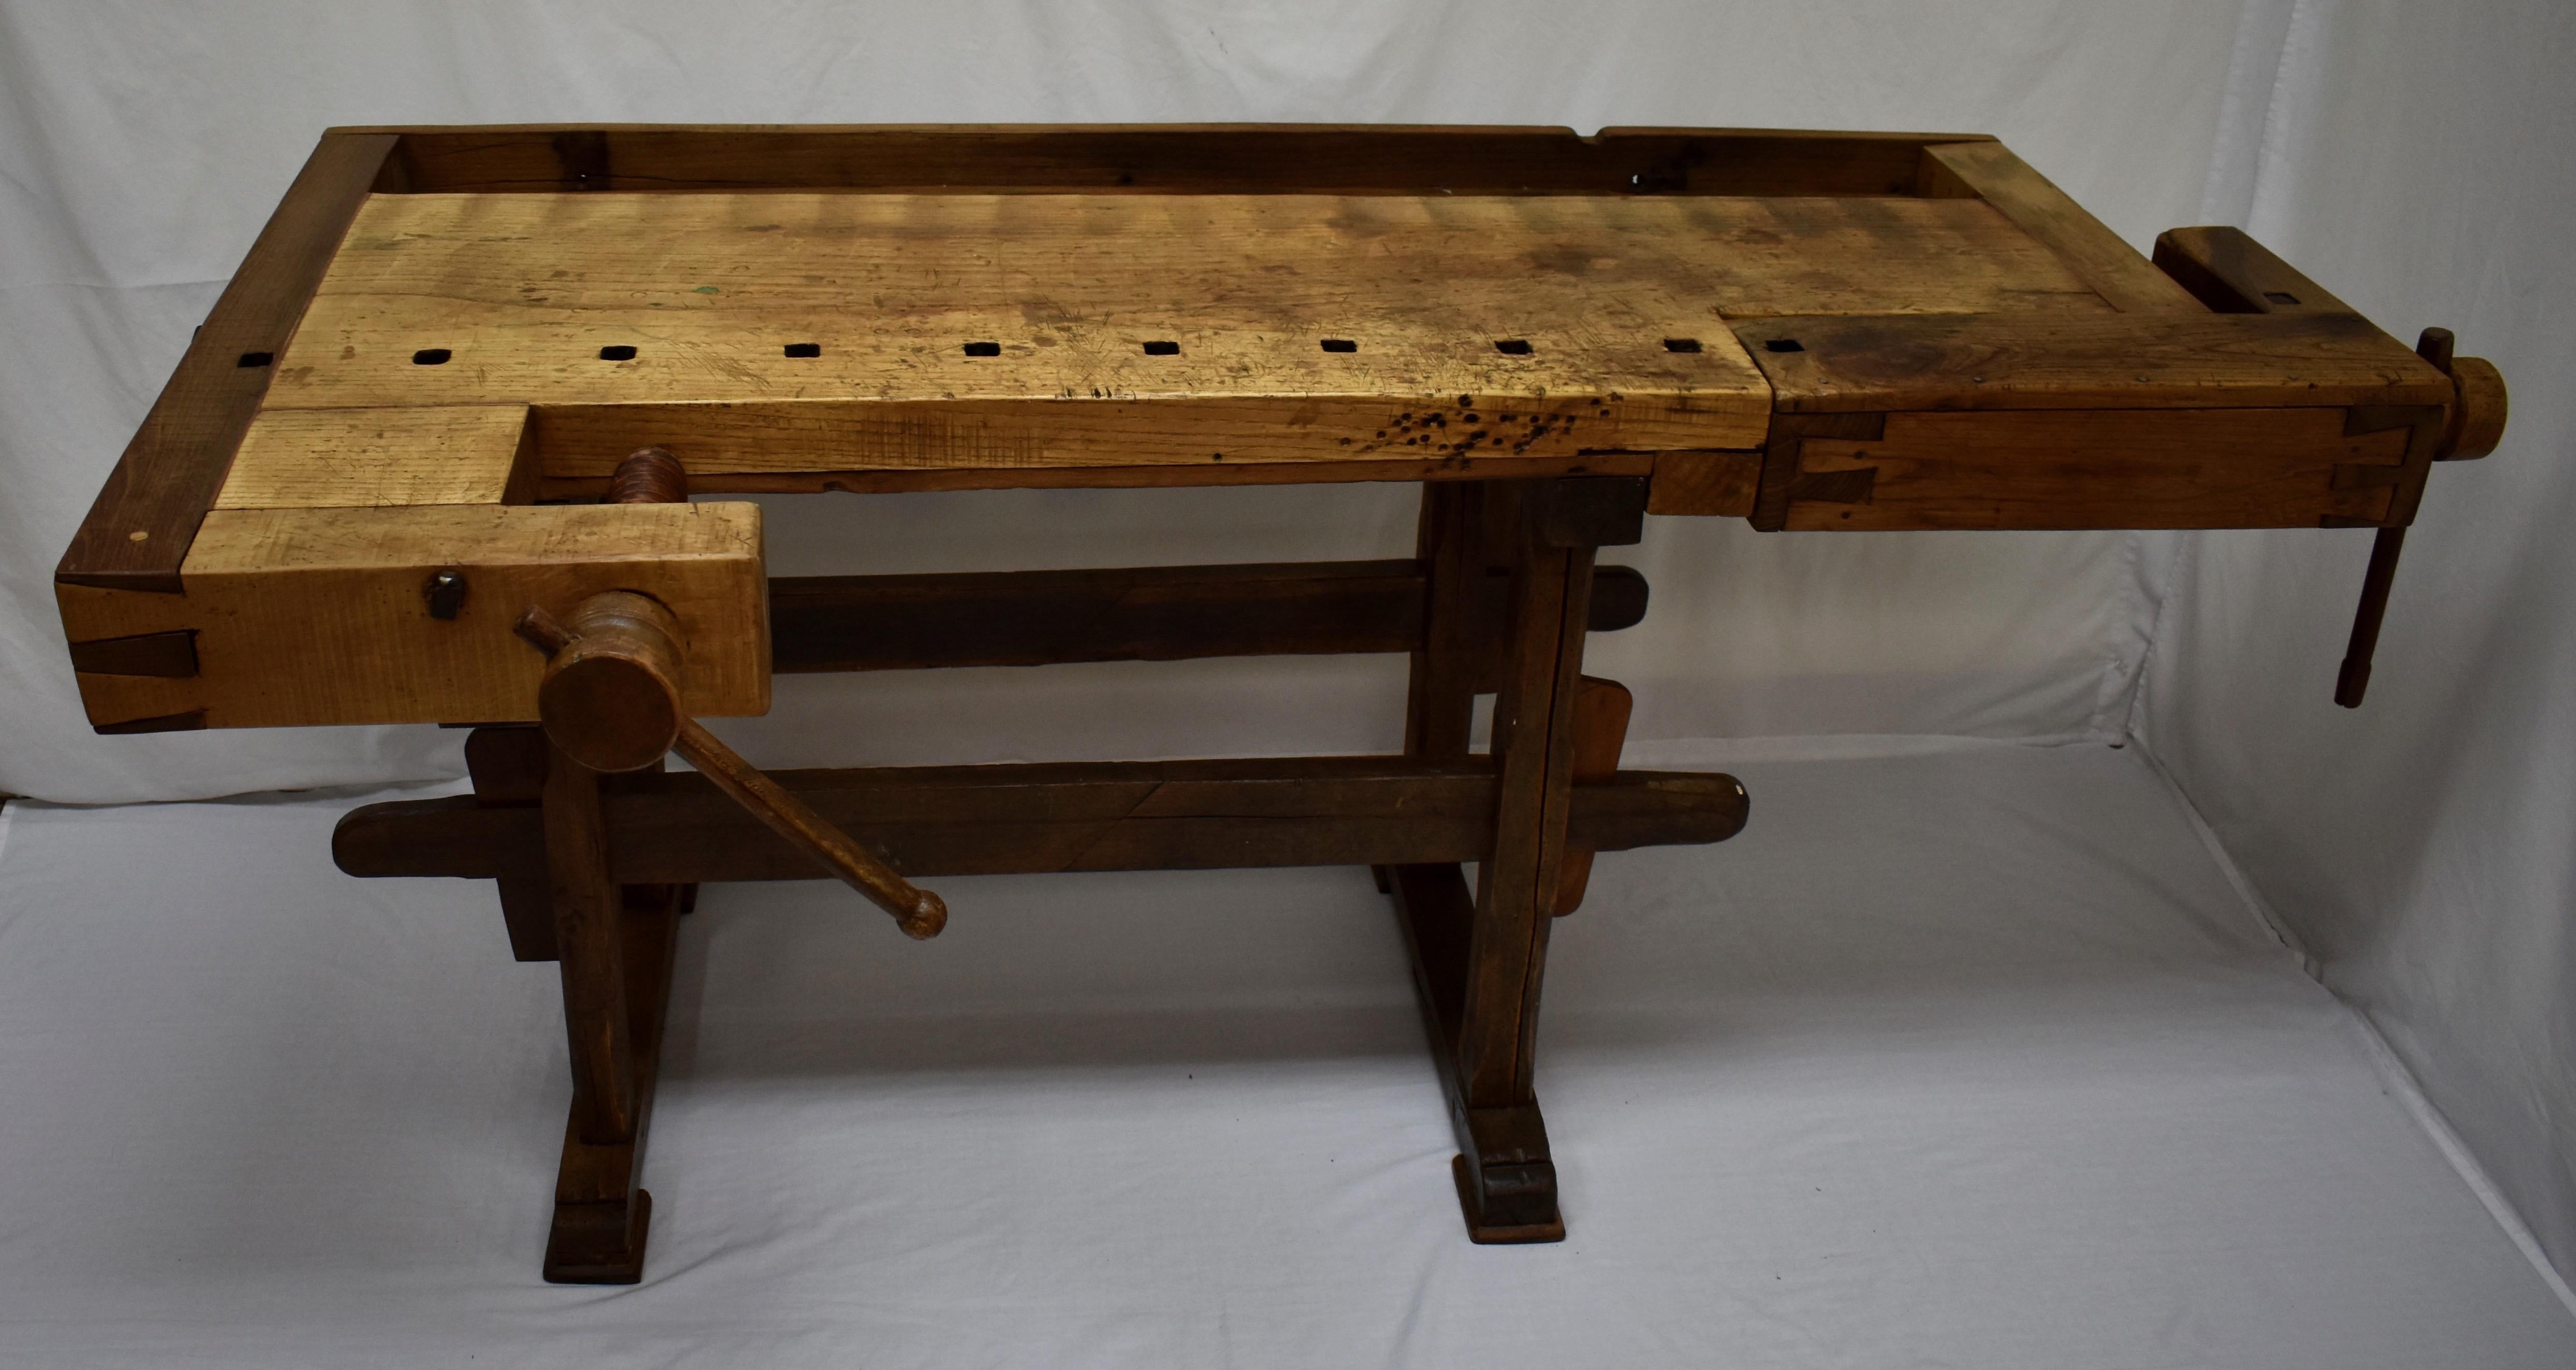 This outstanding oak Joiner’s workbench is smaller than most. It is also less distressed than most, and while it bears all the scars of decades of purposeful use, it does not have the deep gouges, chops and multiple incisions found on most such